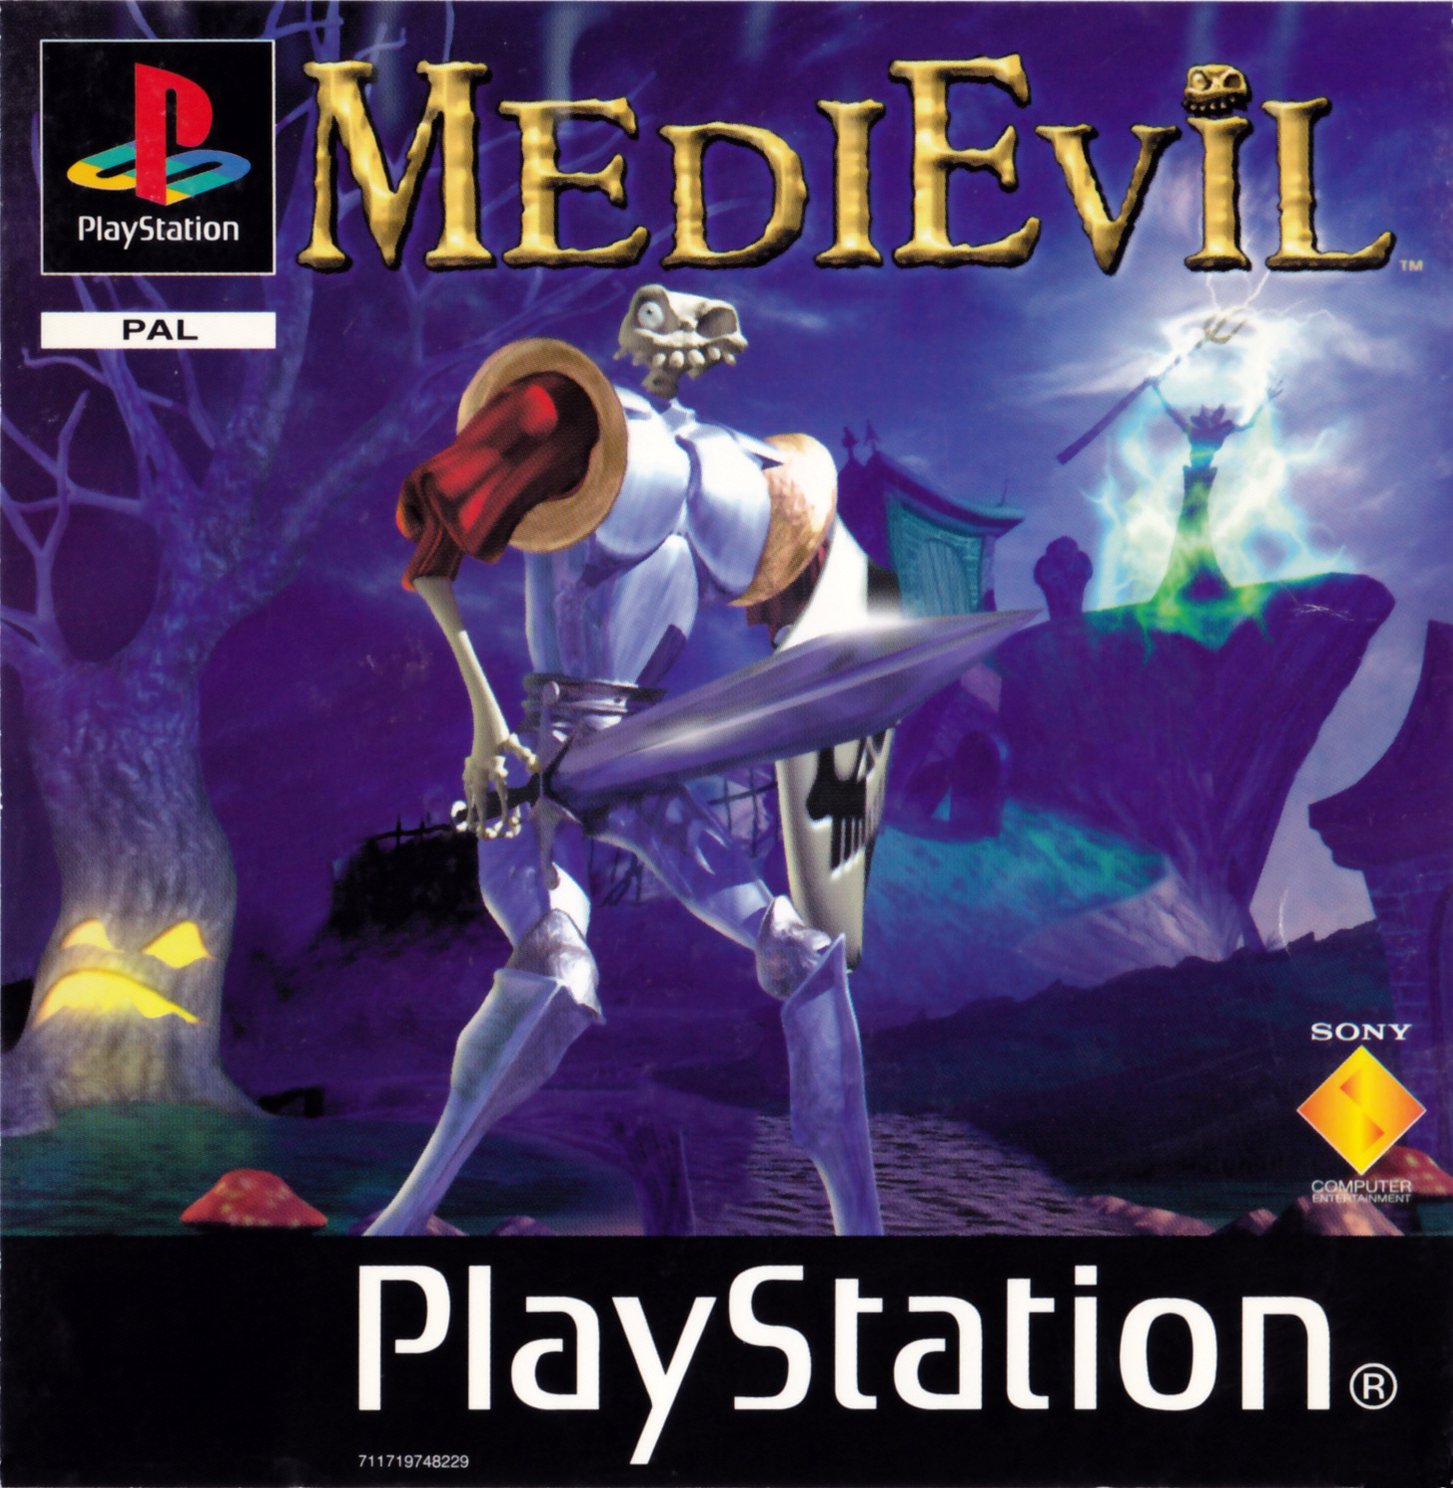 Medievil Remastered news coming within a week or two